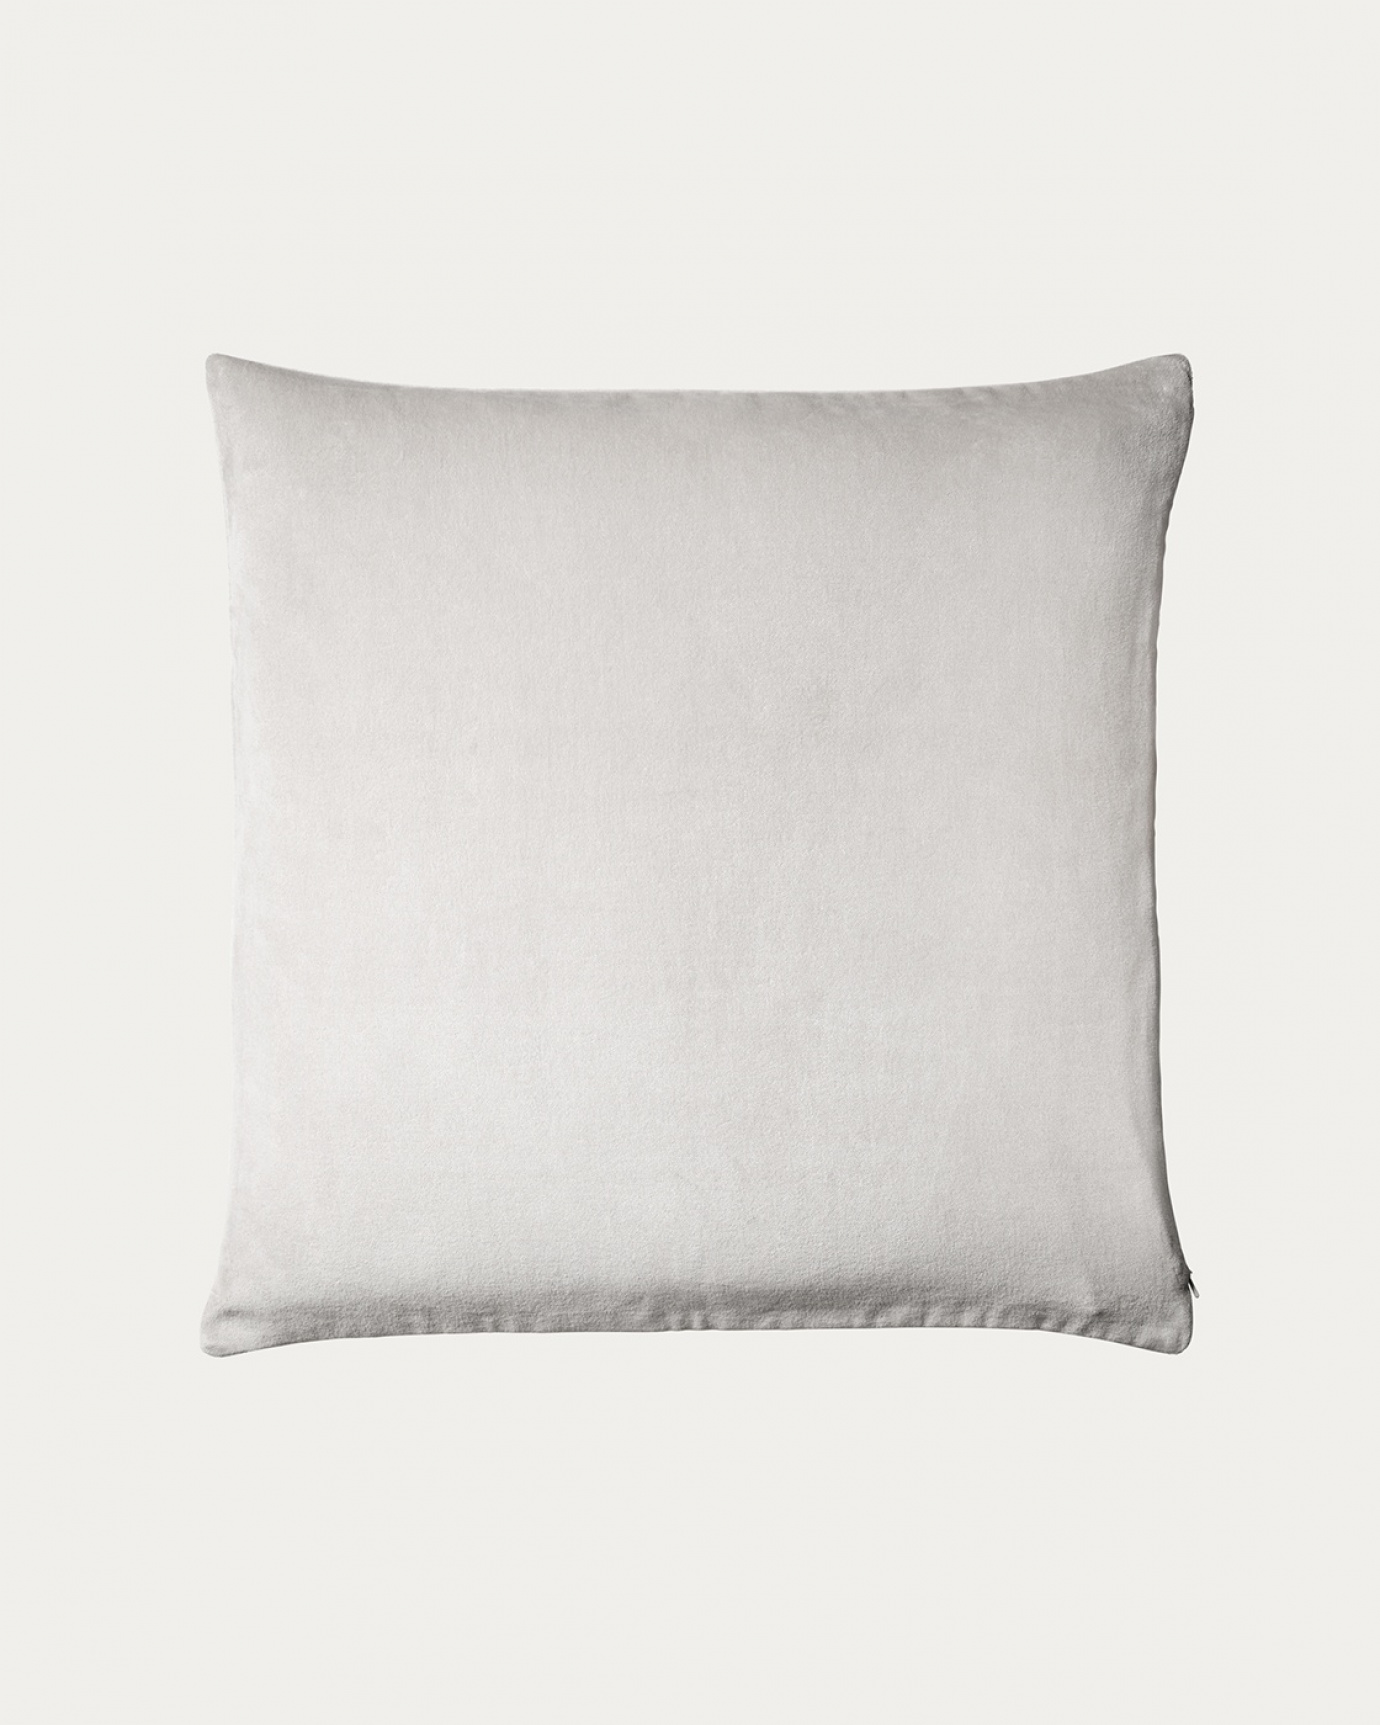 Product image silver grey PAOLO cushion cover in soft organic cotton velvet from LINUM DESIGN. Size 50x50 cm.